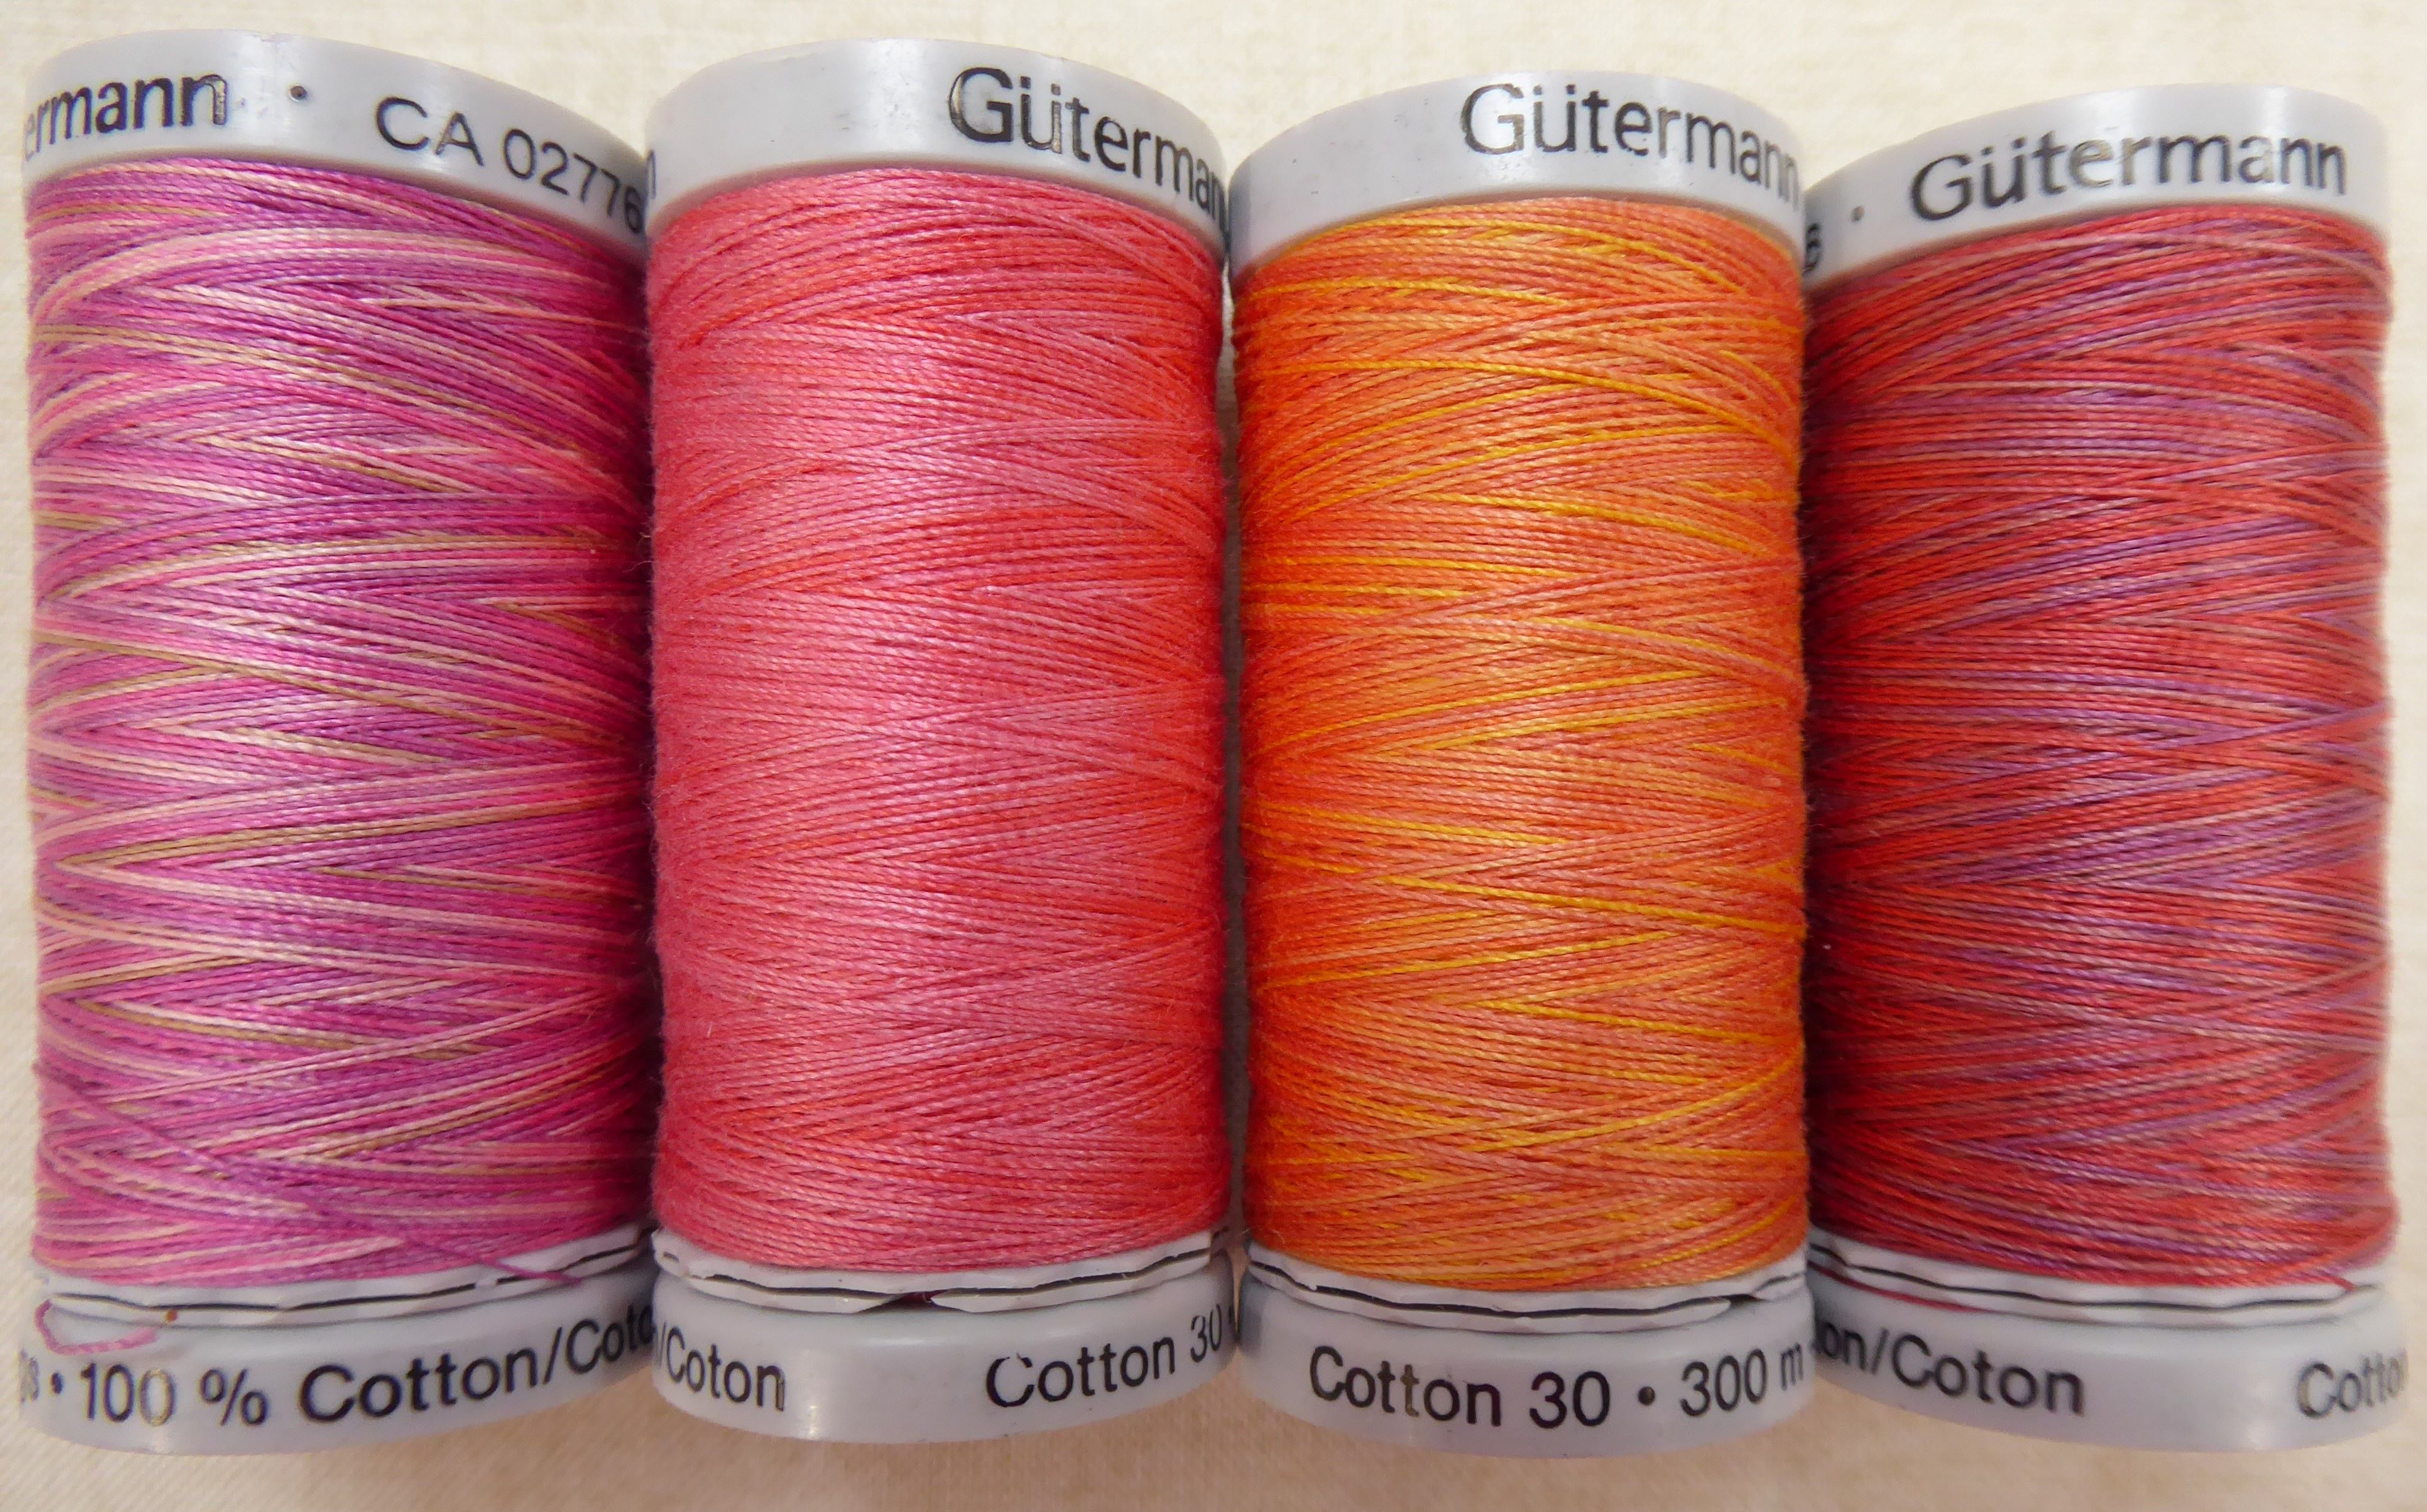 Gutermann Variegated Cotton 30 300m pink and bright